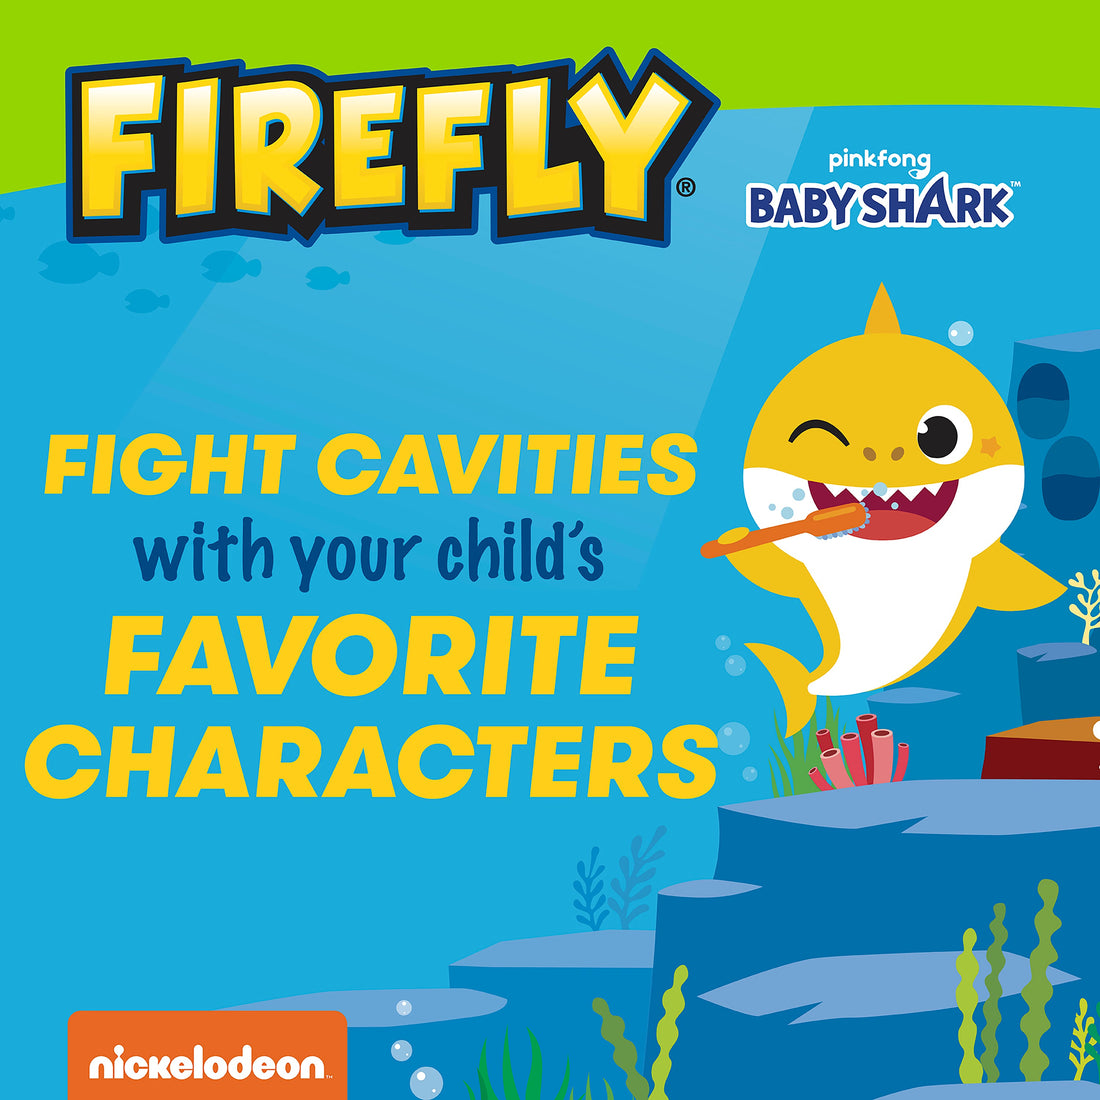 Baby Shark holding a toothbrush brushing teeth. Fight cavities with your child&